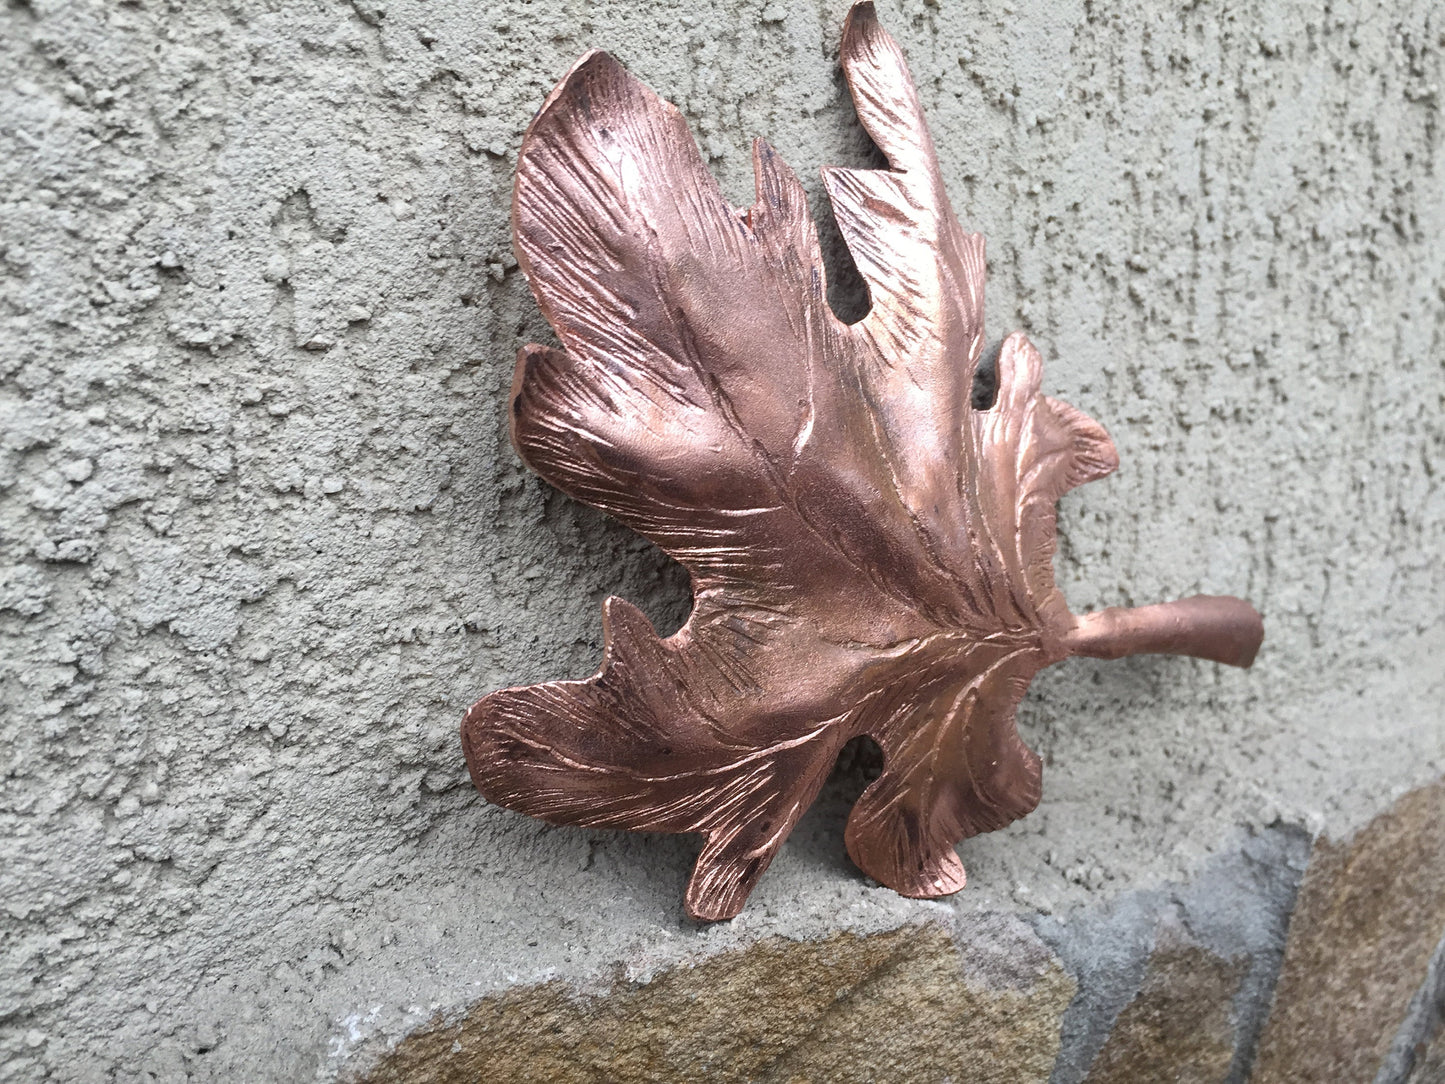 Copper maple leaf, copper anniversary gift, 7 year anniversary, copper gift, copper leaf, copper decor, 7th anniversary, copper art, leaf